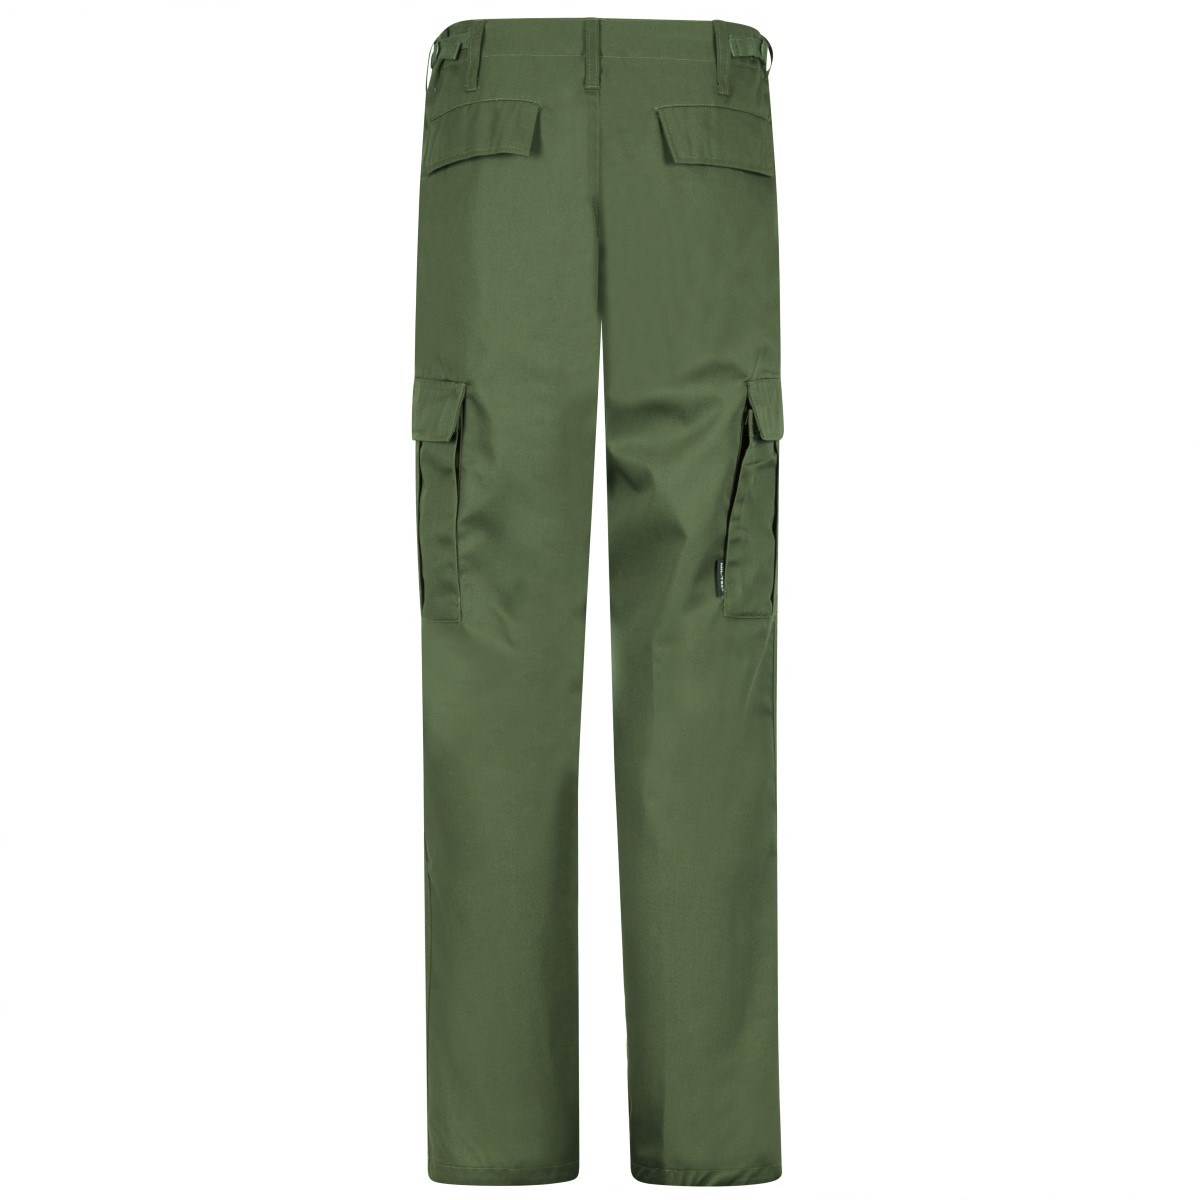 Propper Combat Pants Mens 32 x 36 green Cargo Trousers Tactical Army –  Suncoast Golf Center & Academy